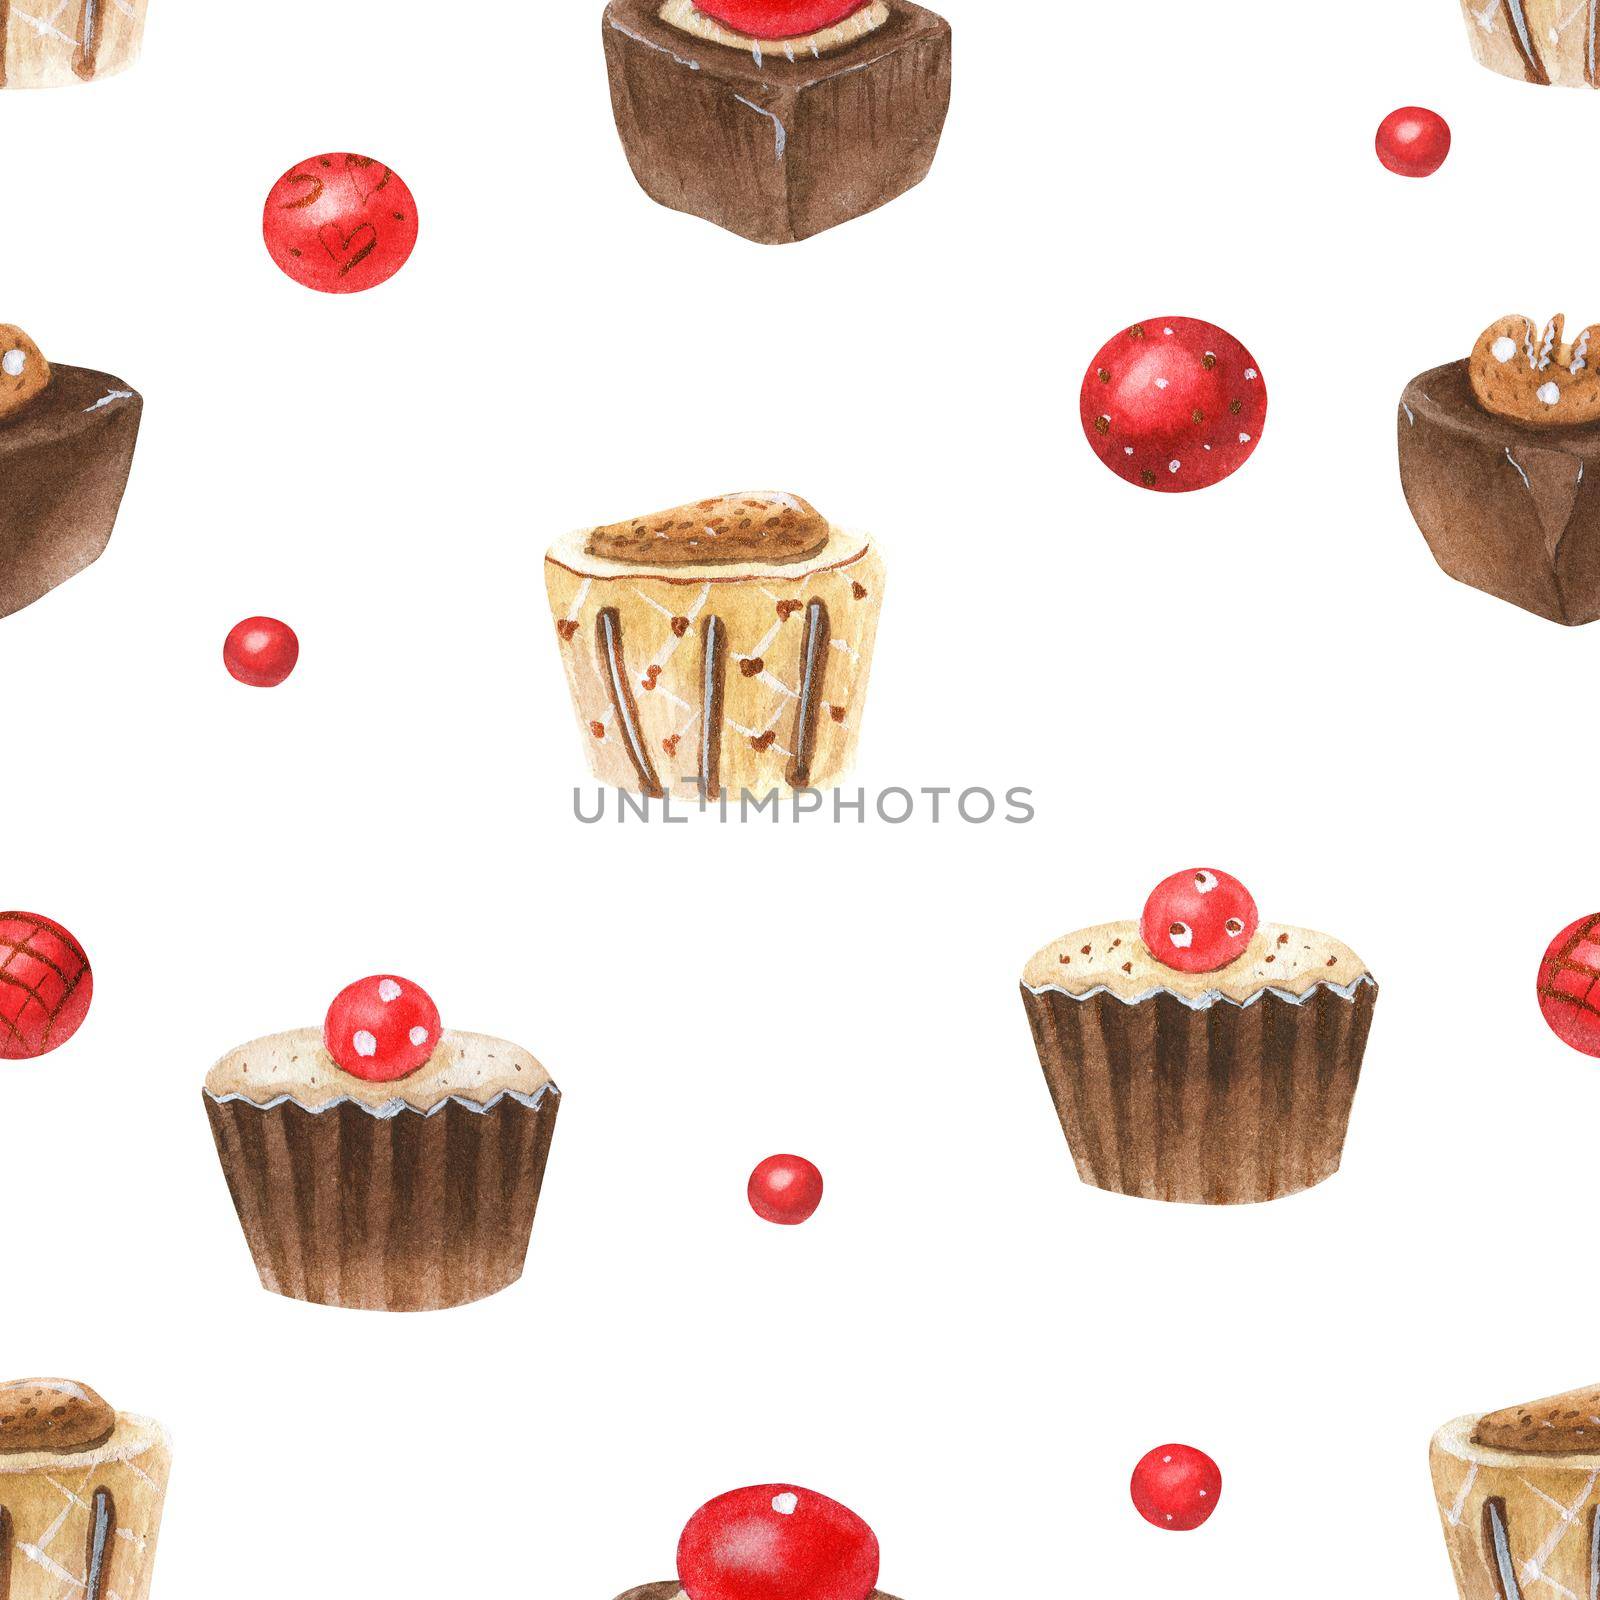 Sweet romantic watercolor pattern with chocolate candies by Xeniasnowstorm